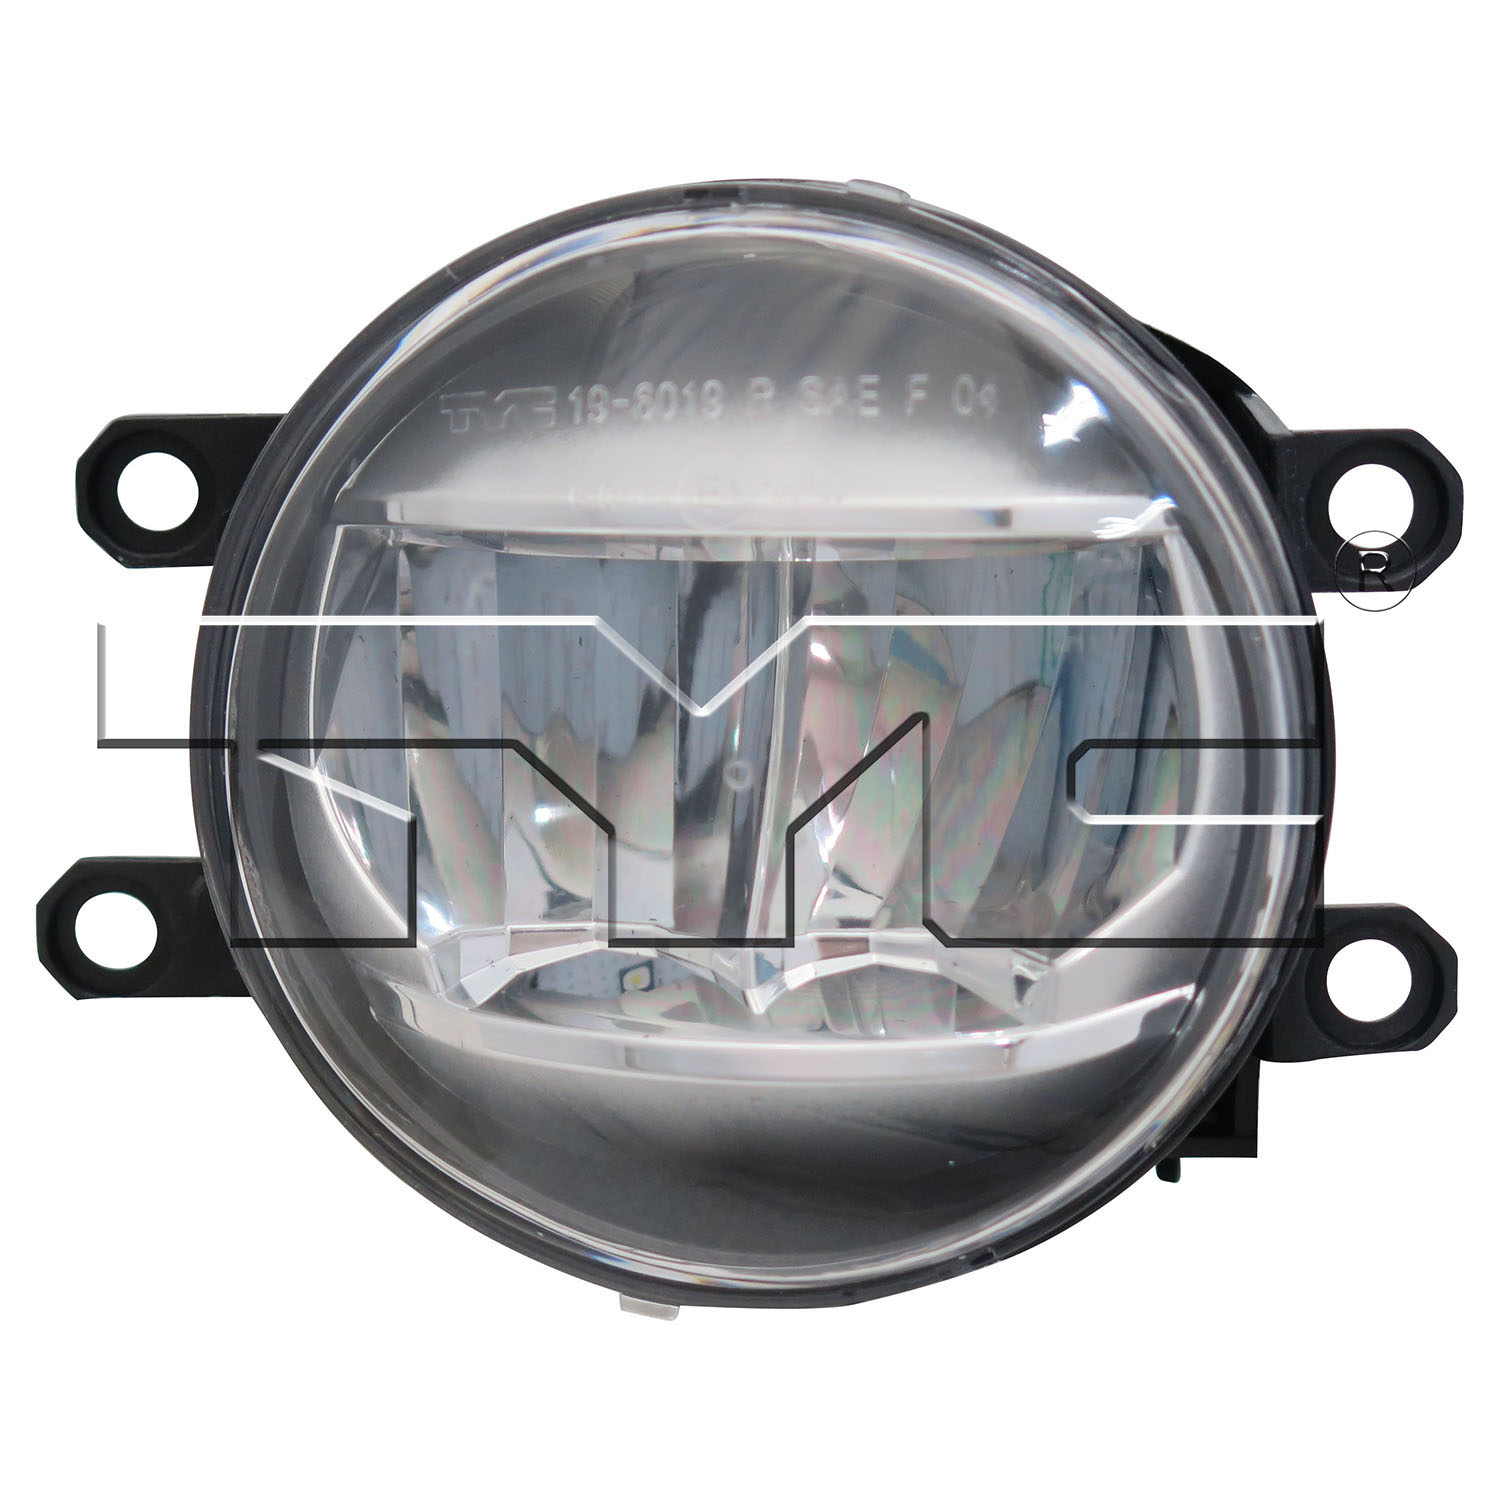 Aftermarket FOG LIGHTS for LEXUS - IS200T, IS200t,16-16,RT Fog lamp assy